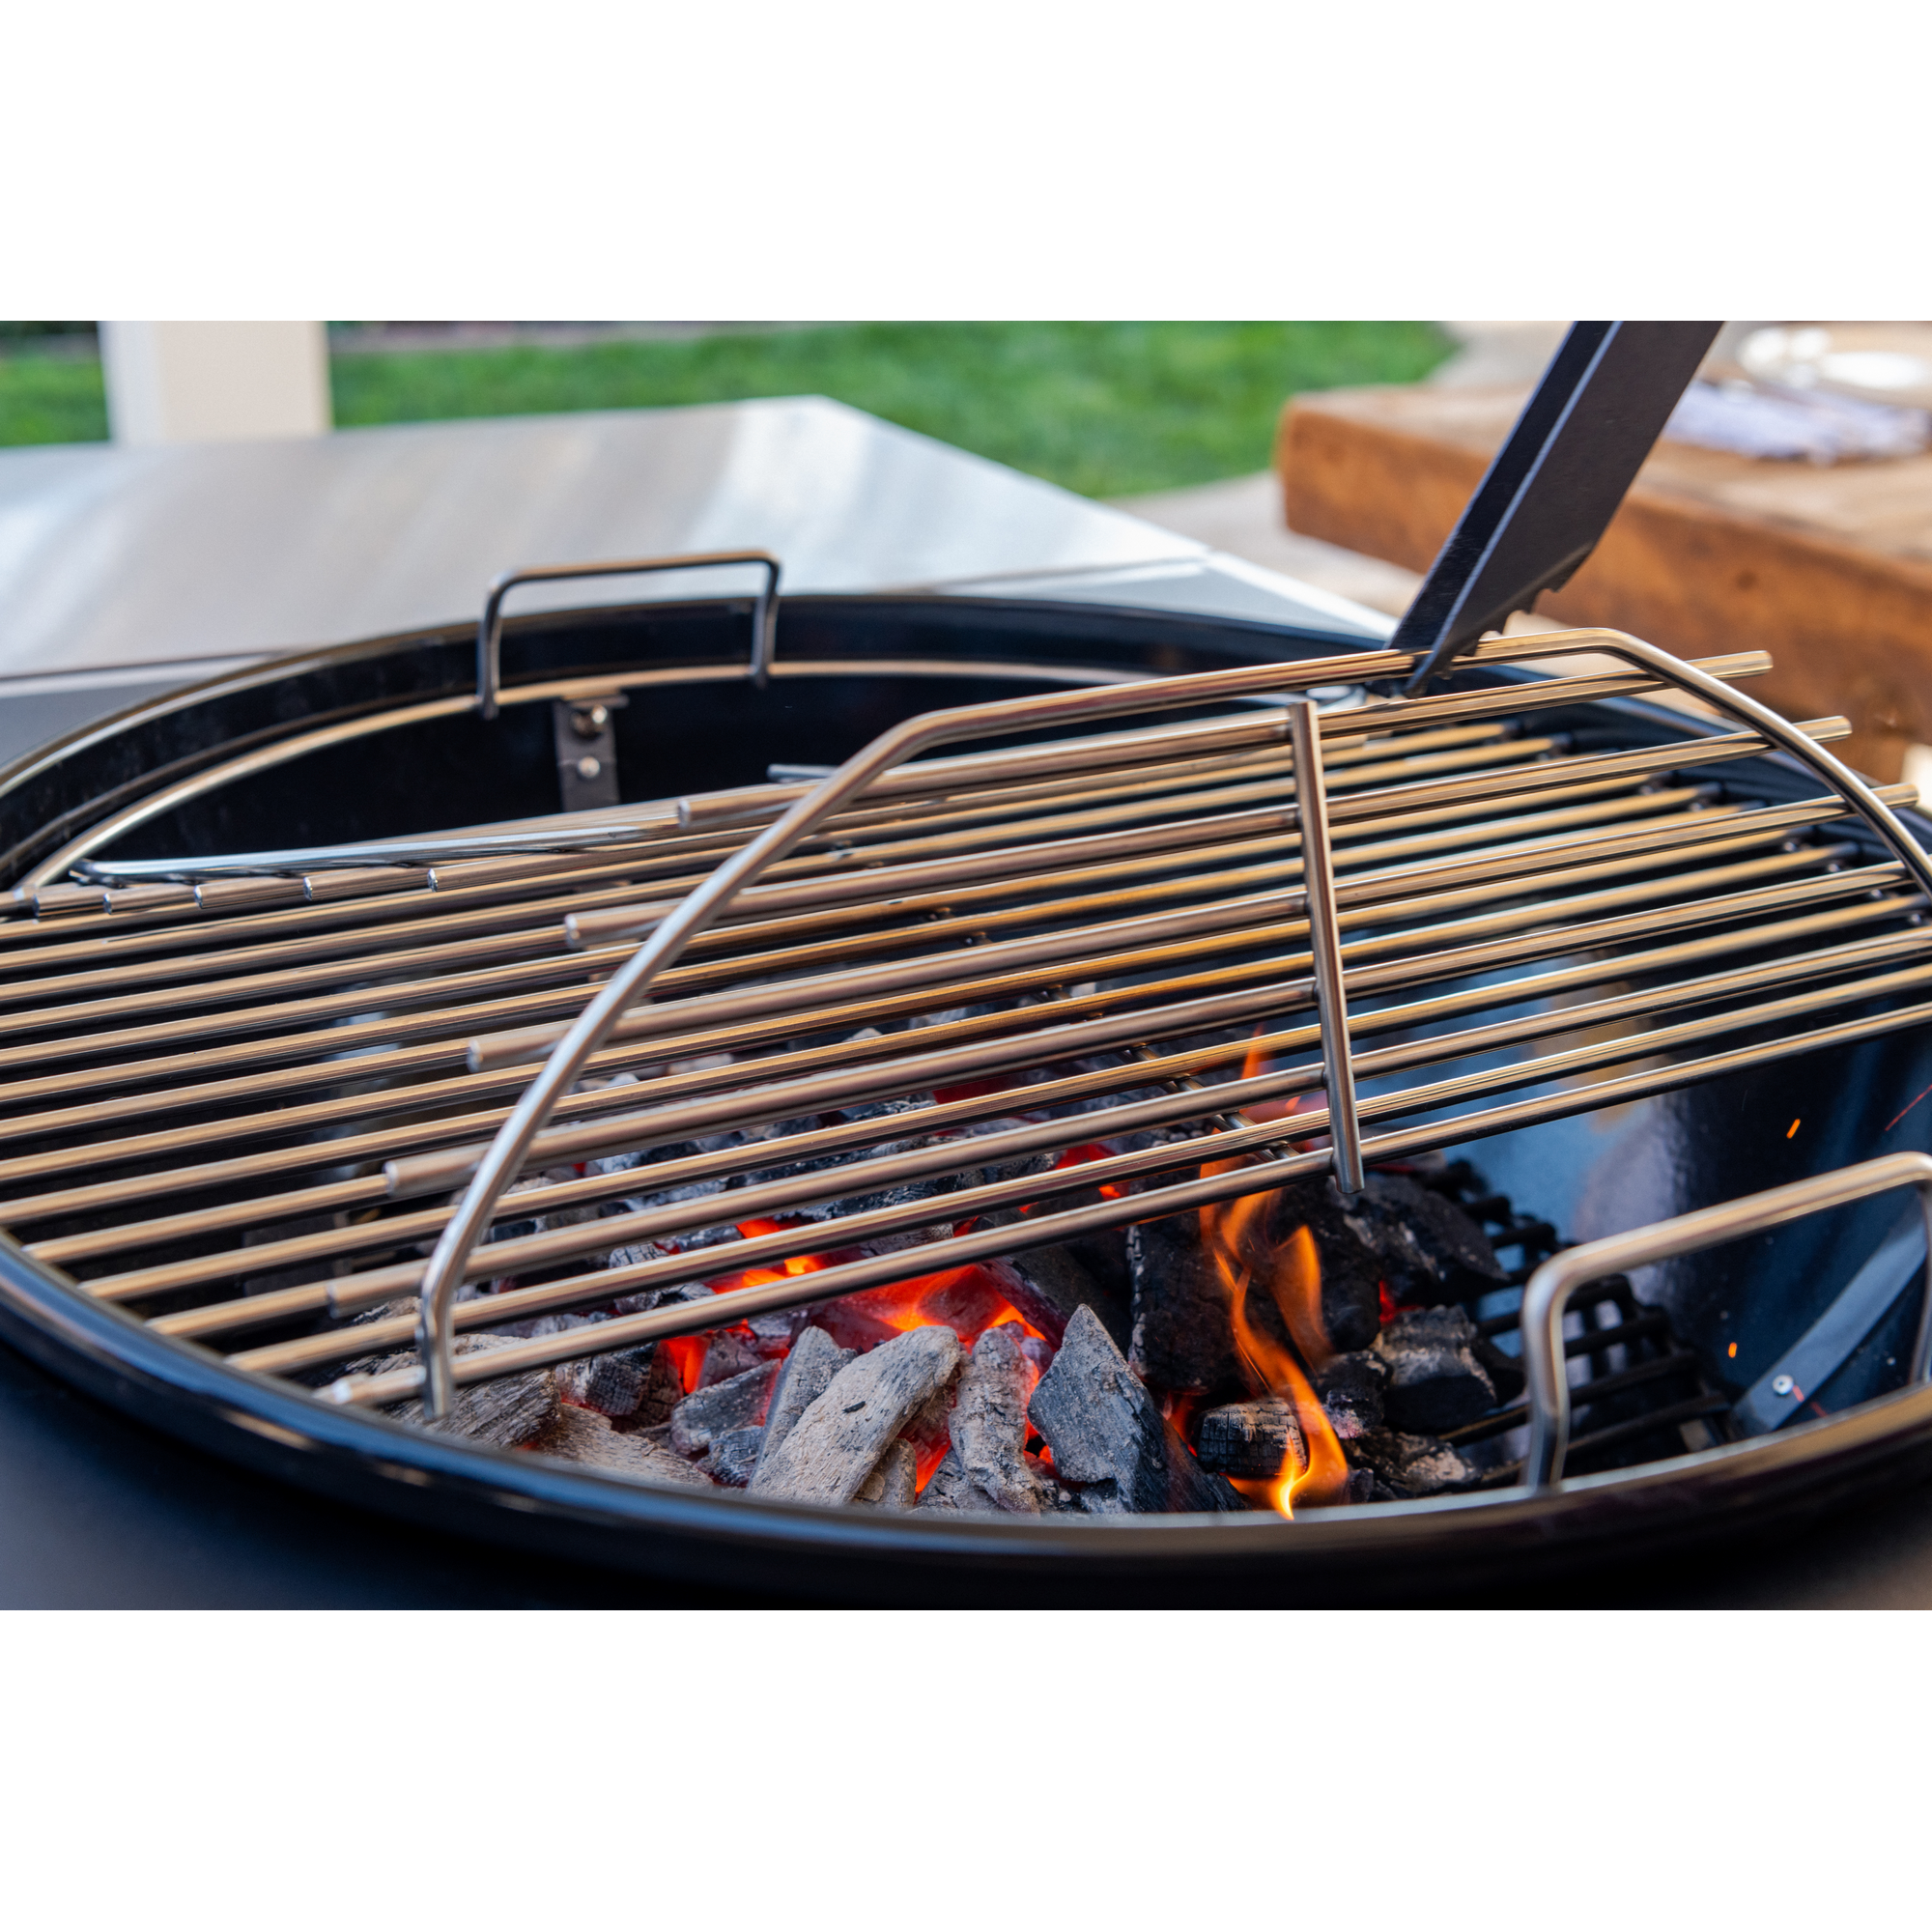 Holzkohle-Kugelgrill mit Wagen, Grillrost-Ø 54 cm, 127 x 112 cm + product picture